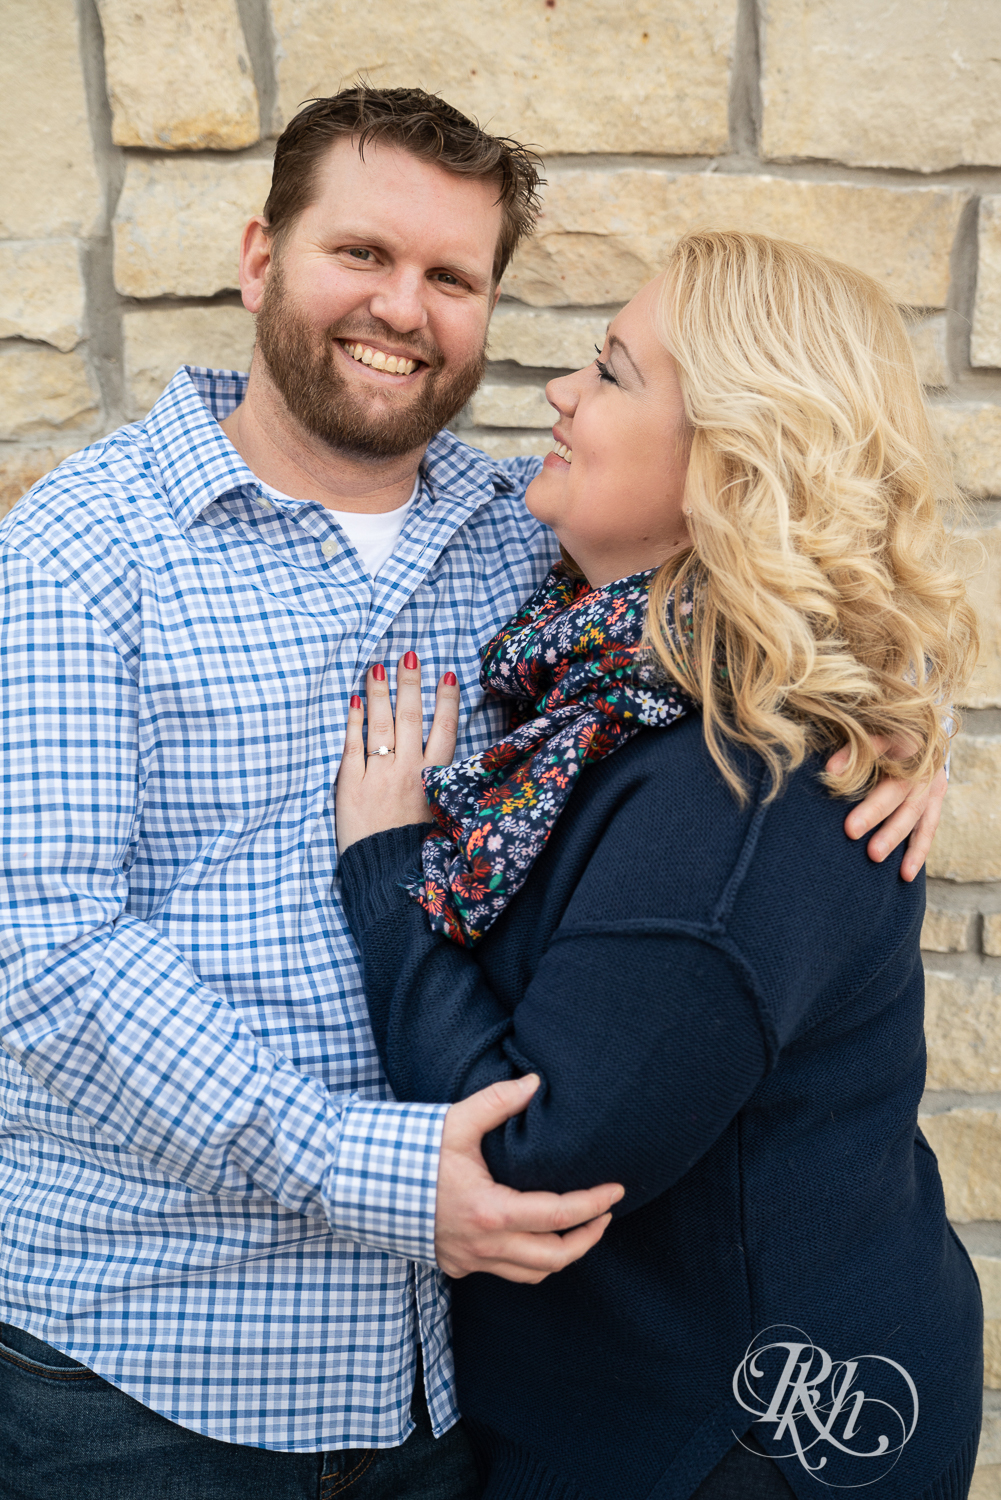 Blond woman and bearded man smile against brick wall in Stillwater, Minnesota.